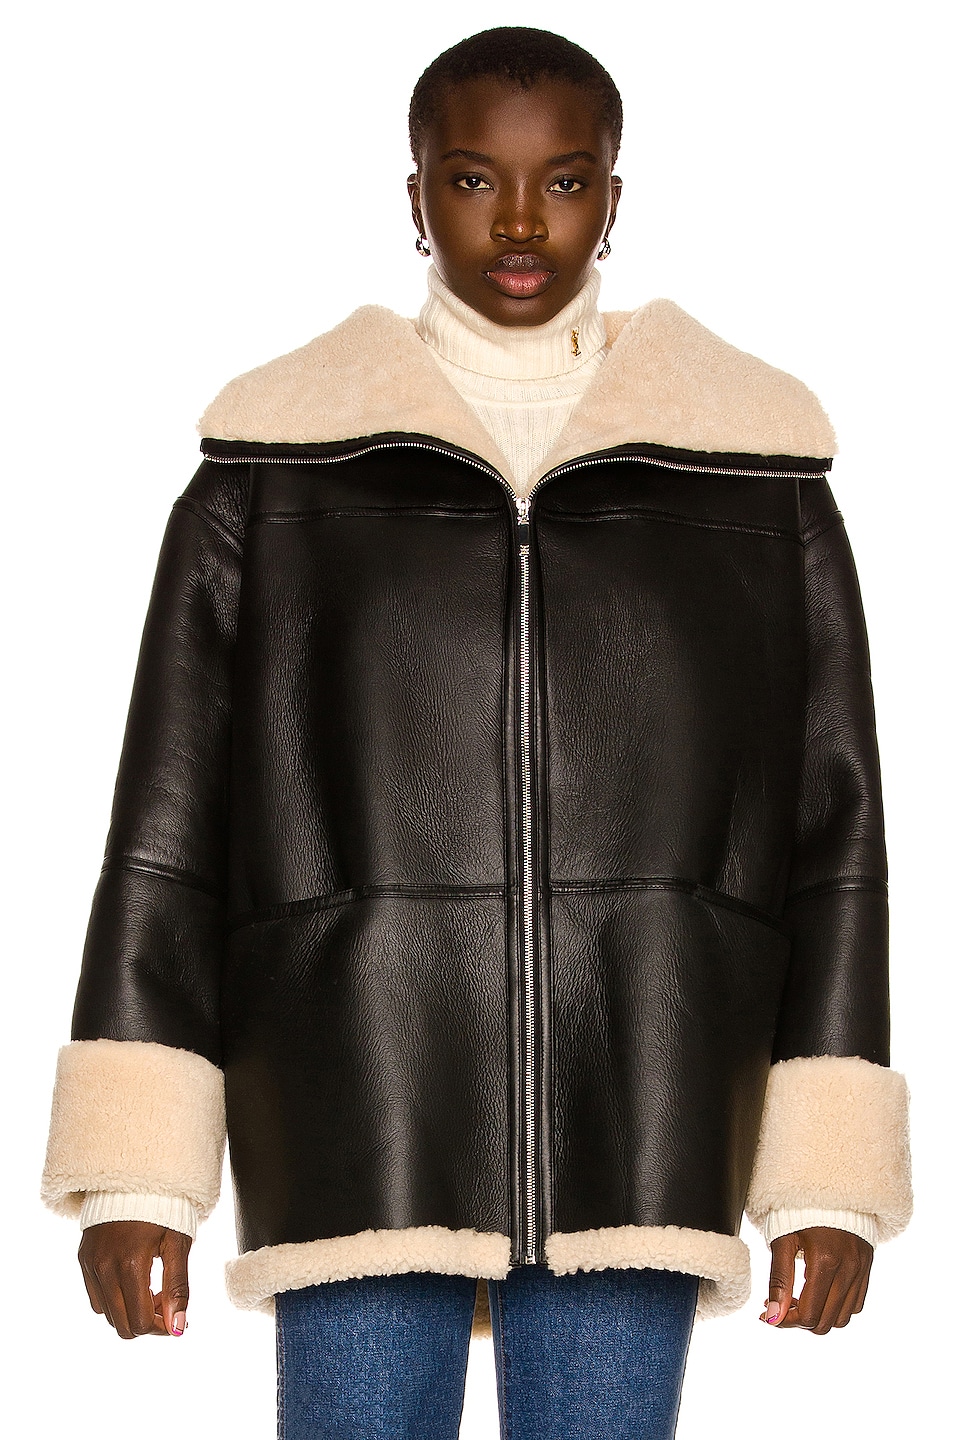 Toteme Signature Shearling Jacket in Black & Off White | FWRD